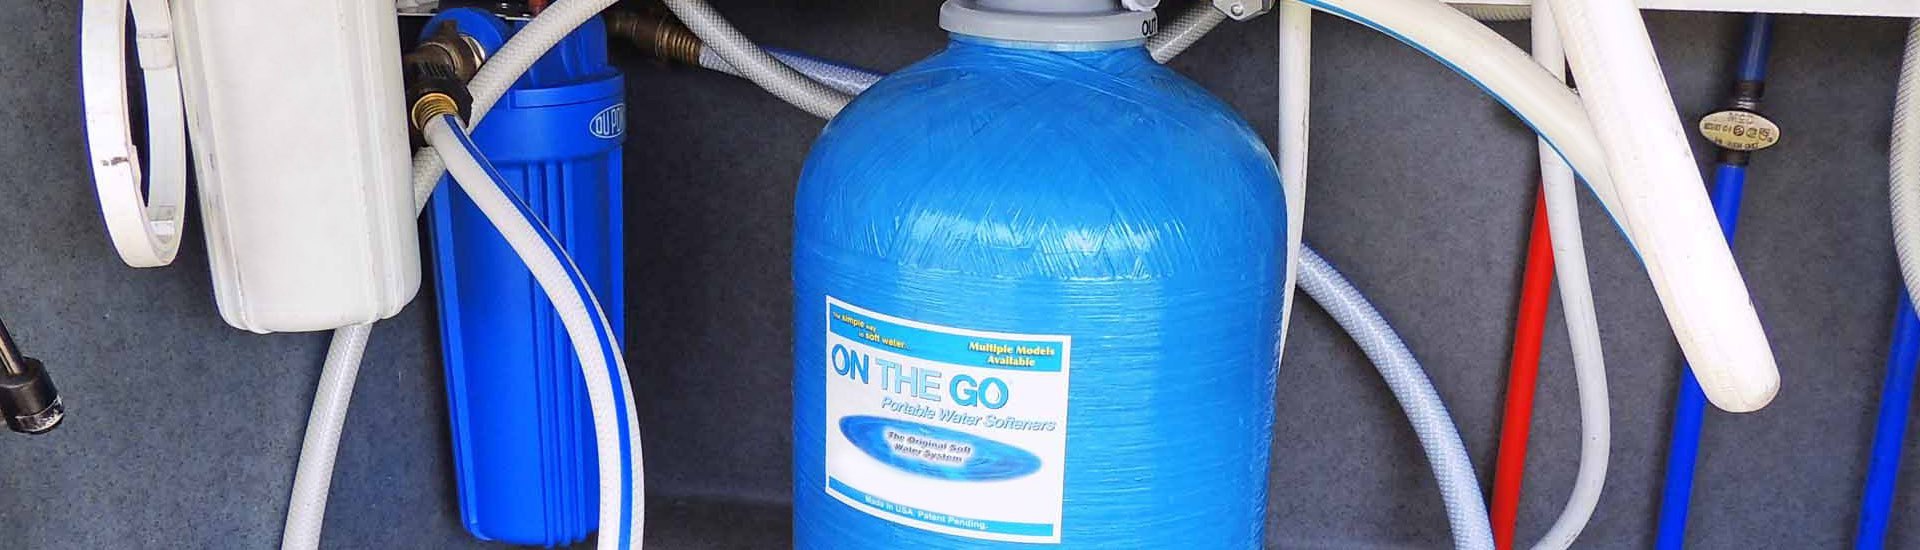 On The Go OTG3NTP3M Portable Water Softener - Replacement Water Filters 